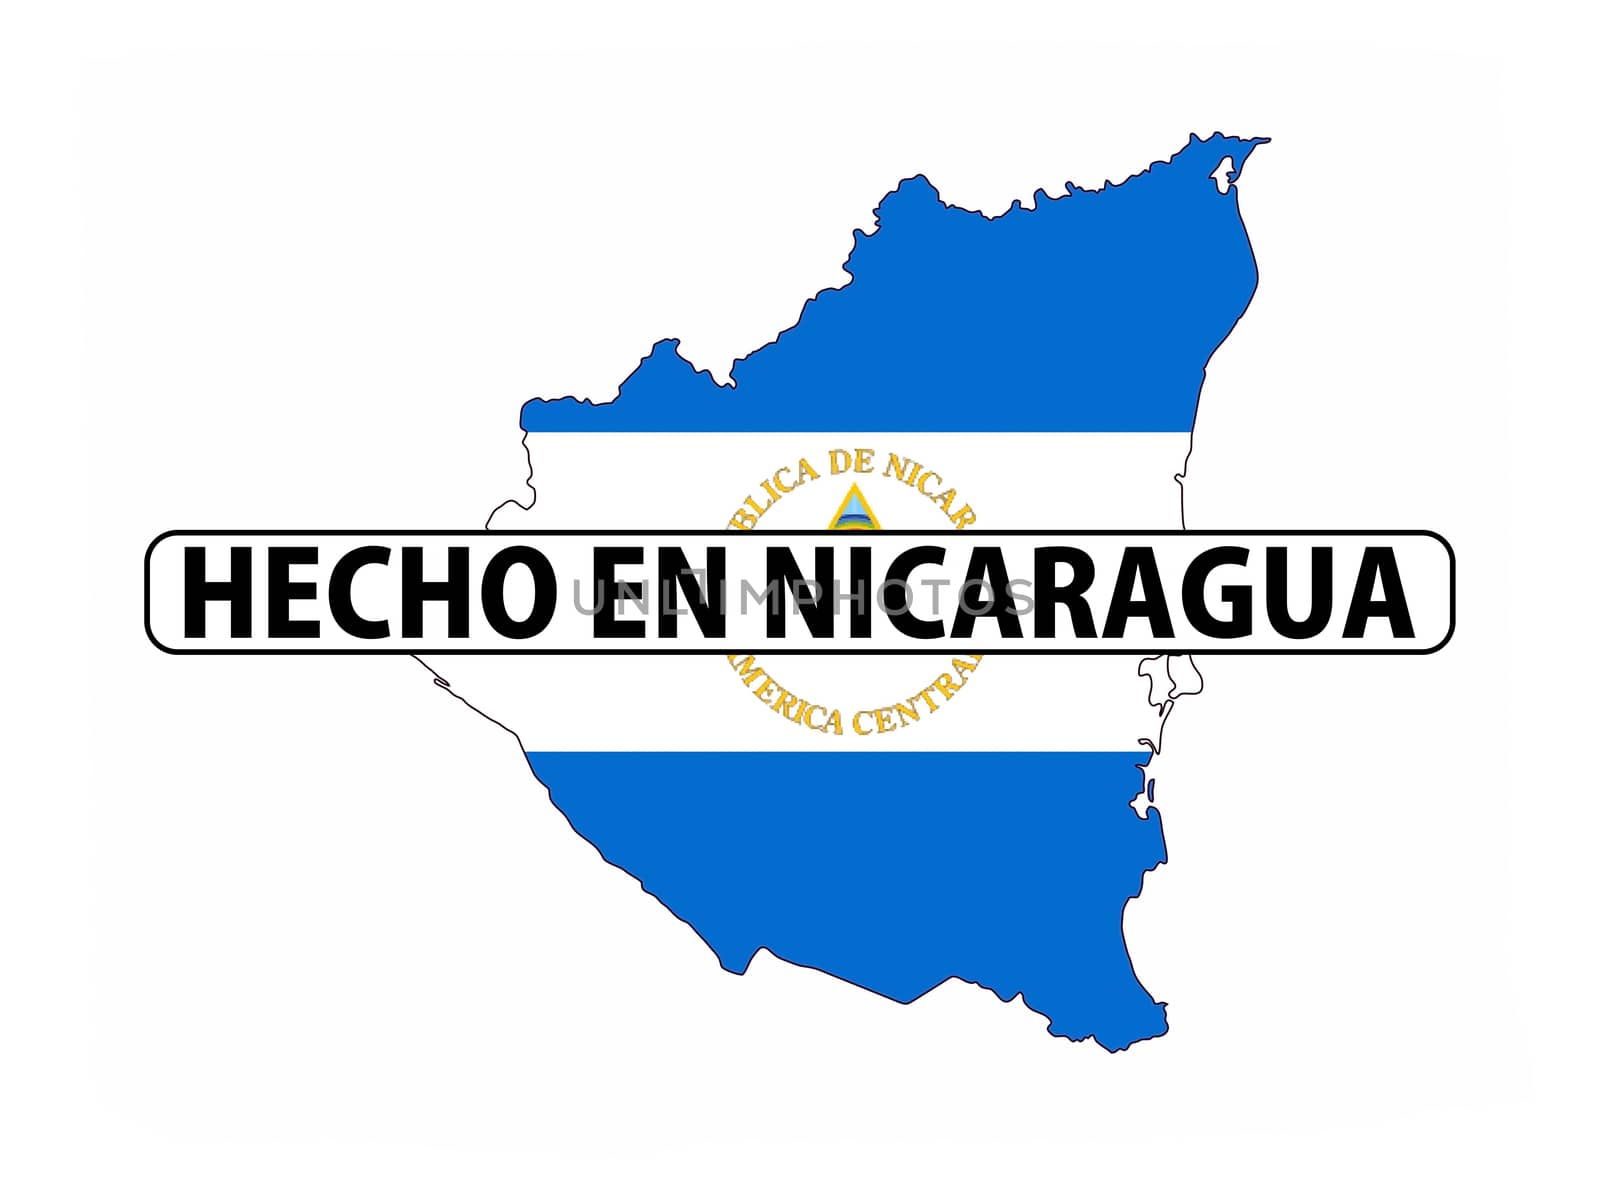 made in nicaragua country national flag map shape with text